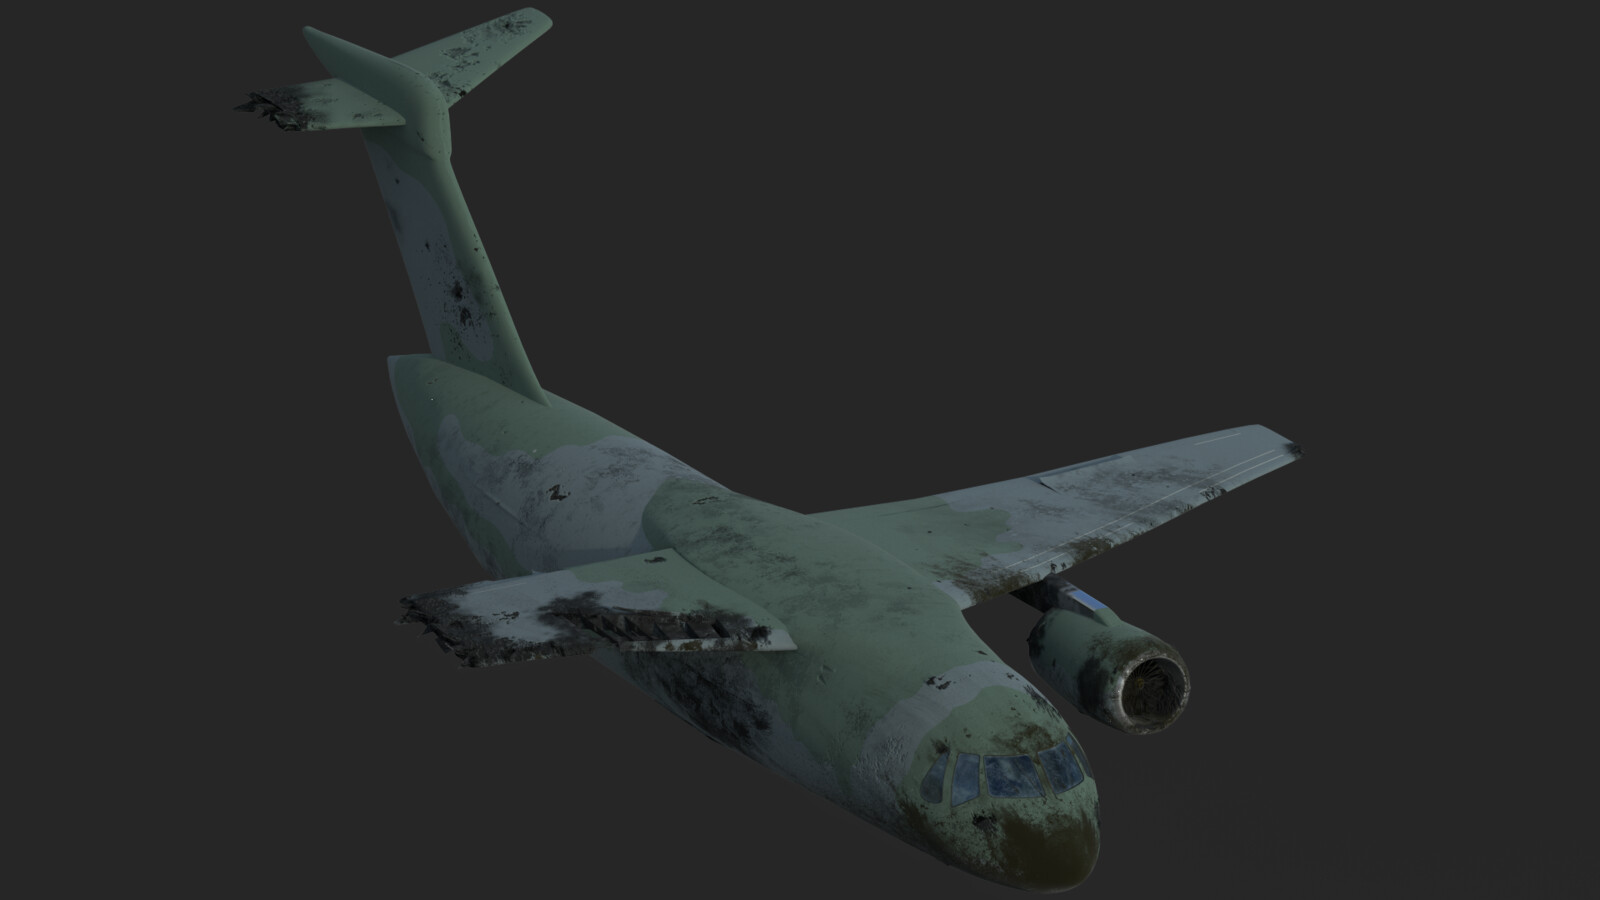 The base model and texture of the plane. It is based of a KC-390 Brazilian transport plane.